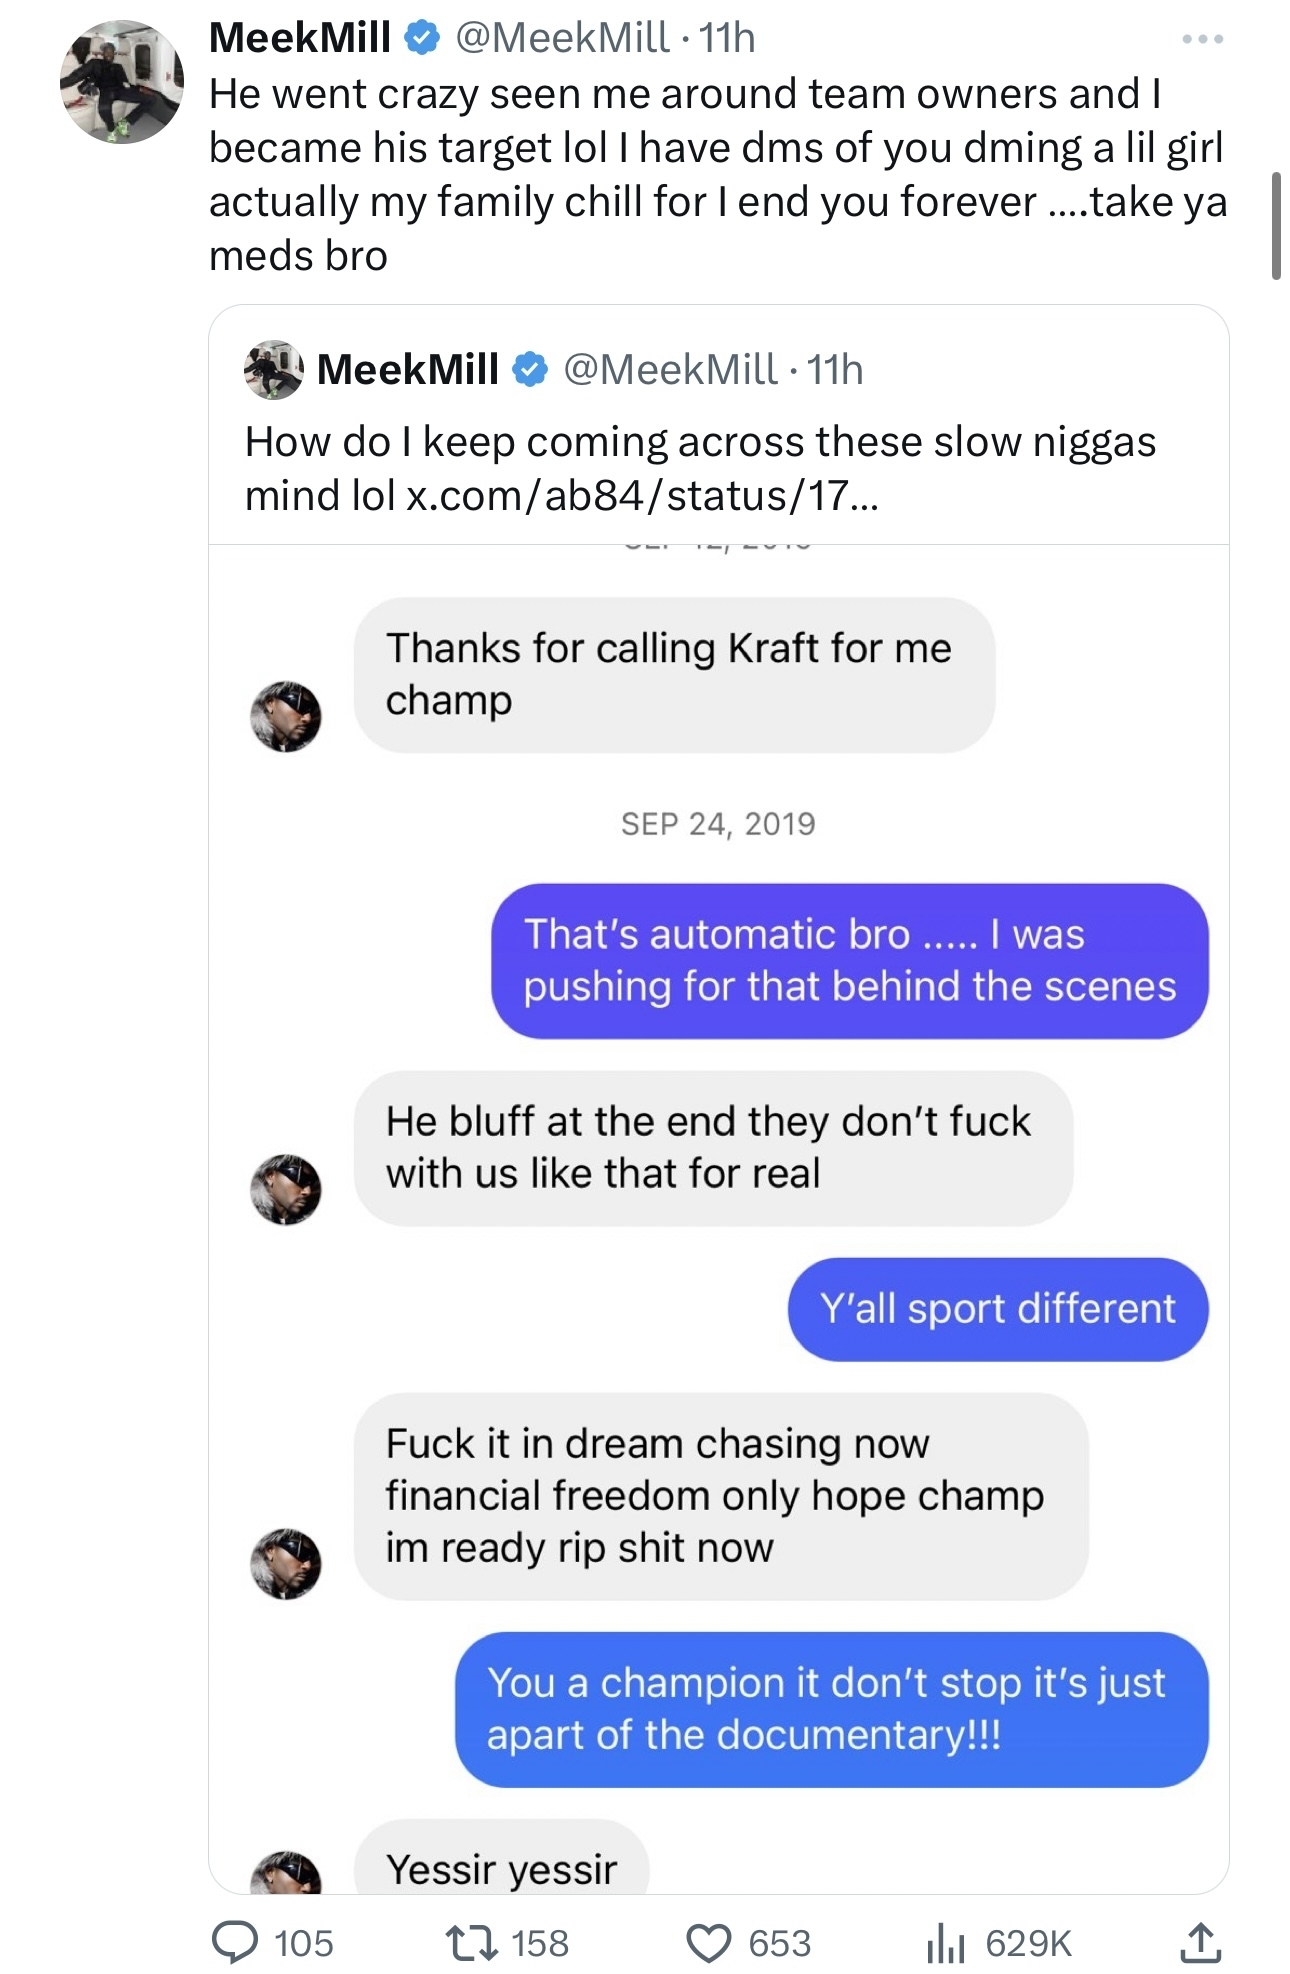 The image contains a series of tweets from Meek Mill discussing a person&#x27;s support and financial independence